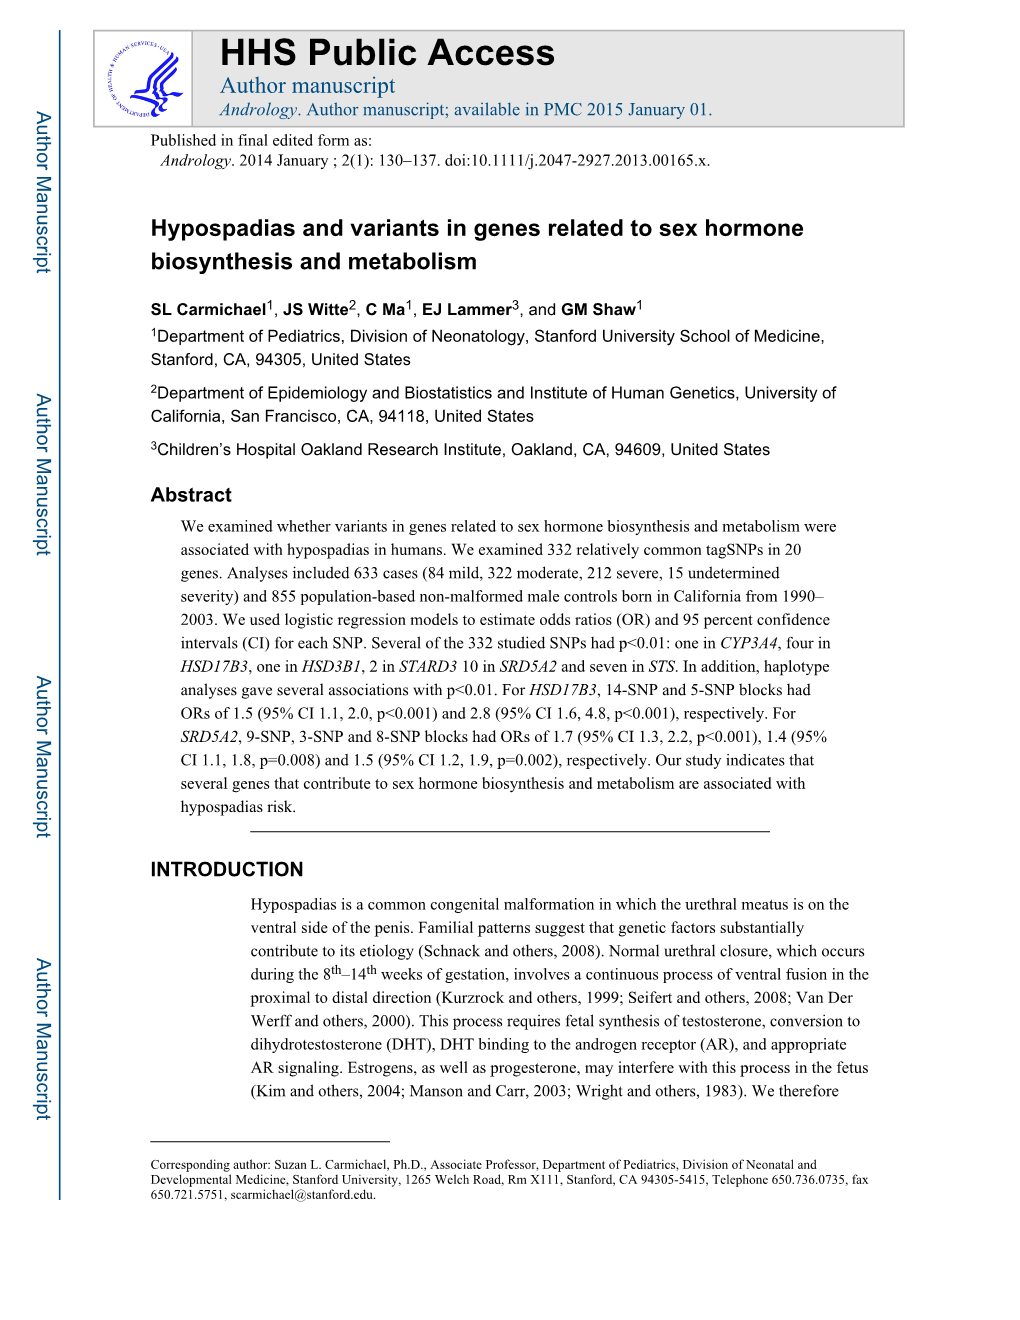 Hypospadias and Variants in Genes Related to Sex Hormone Biosynthesis and Metabolism